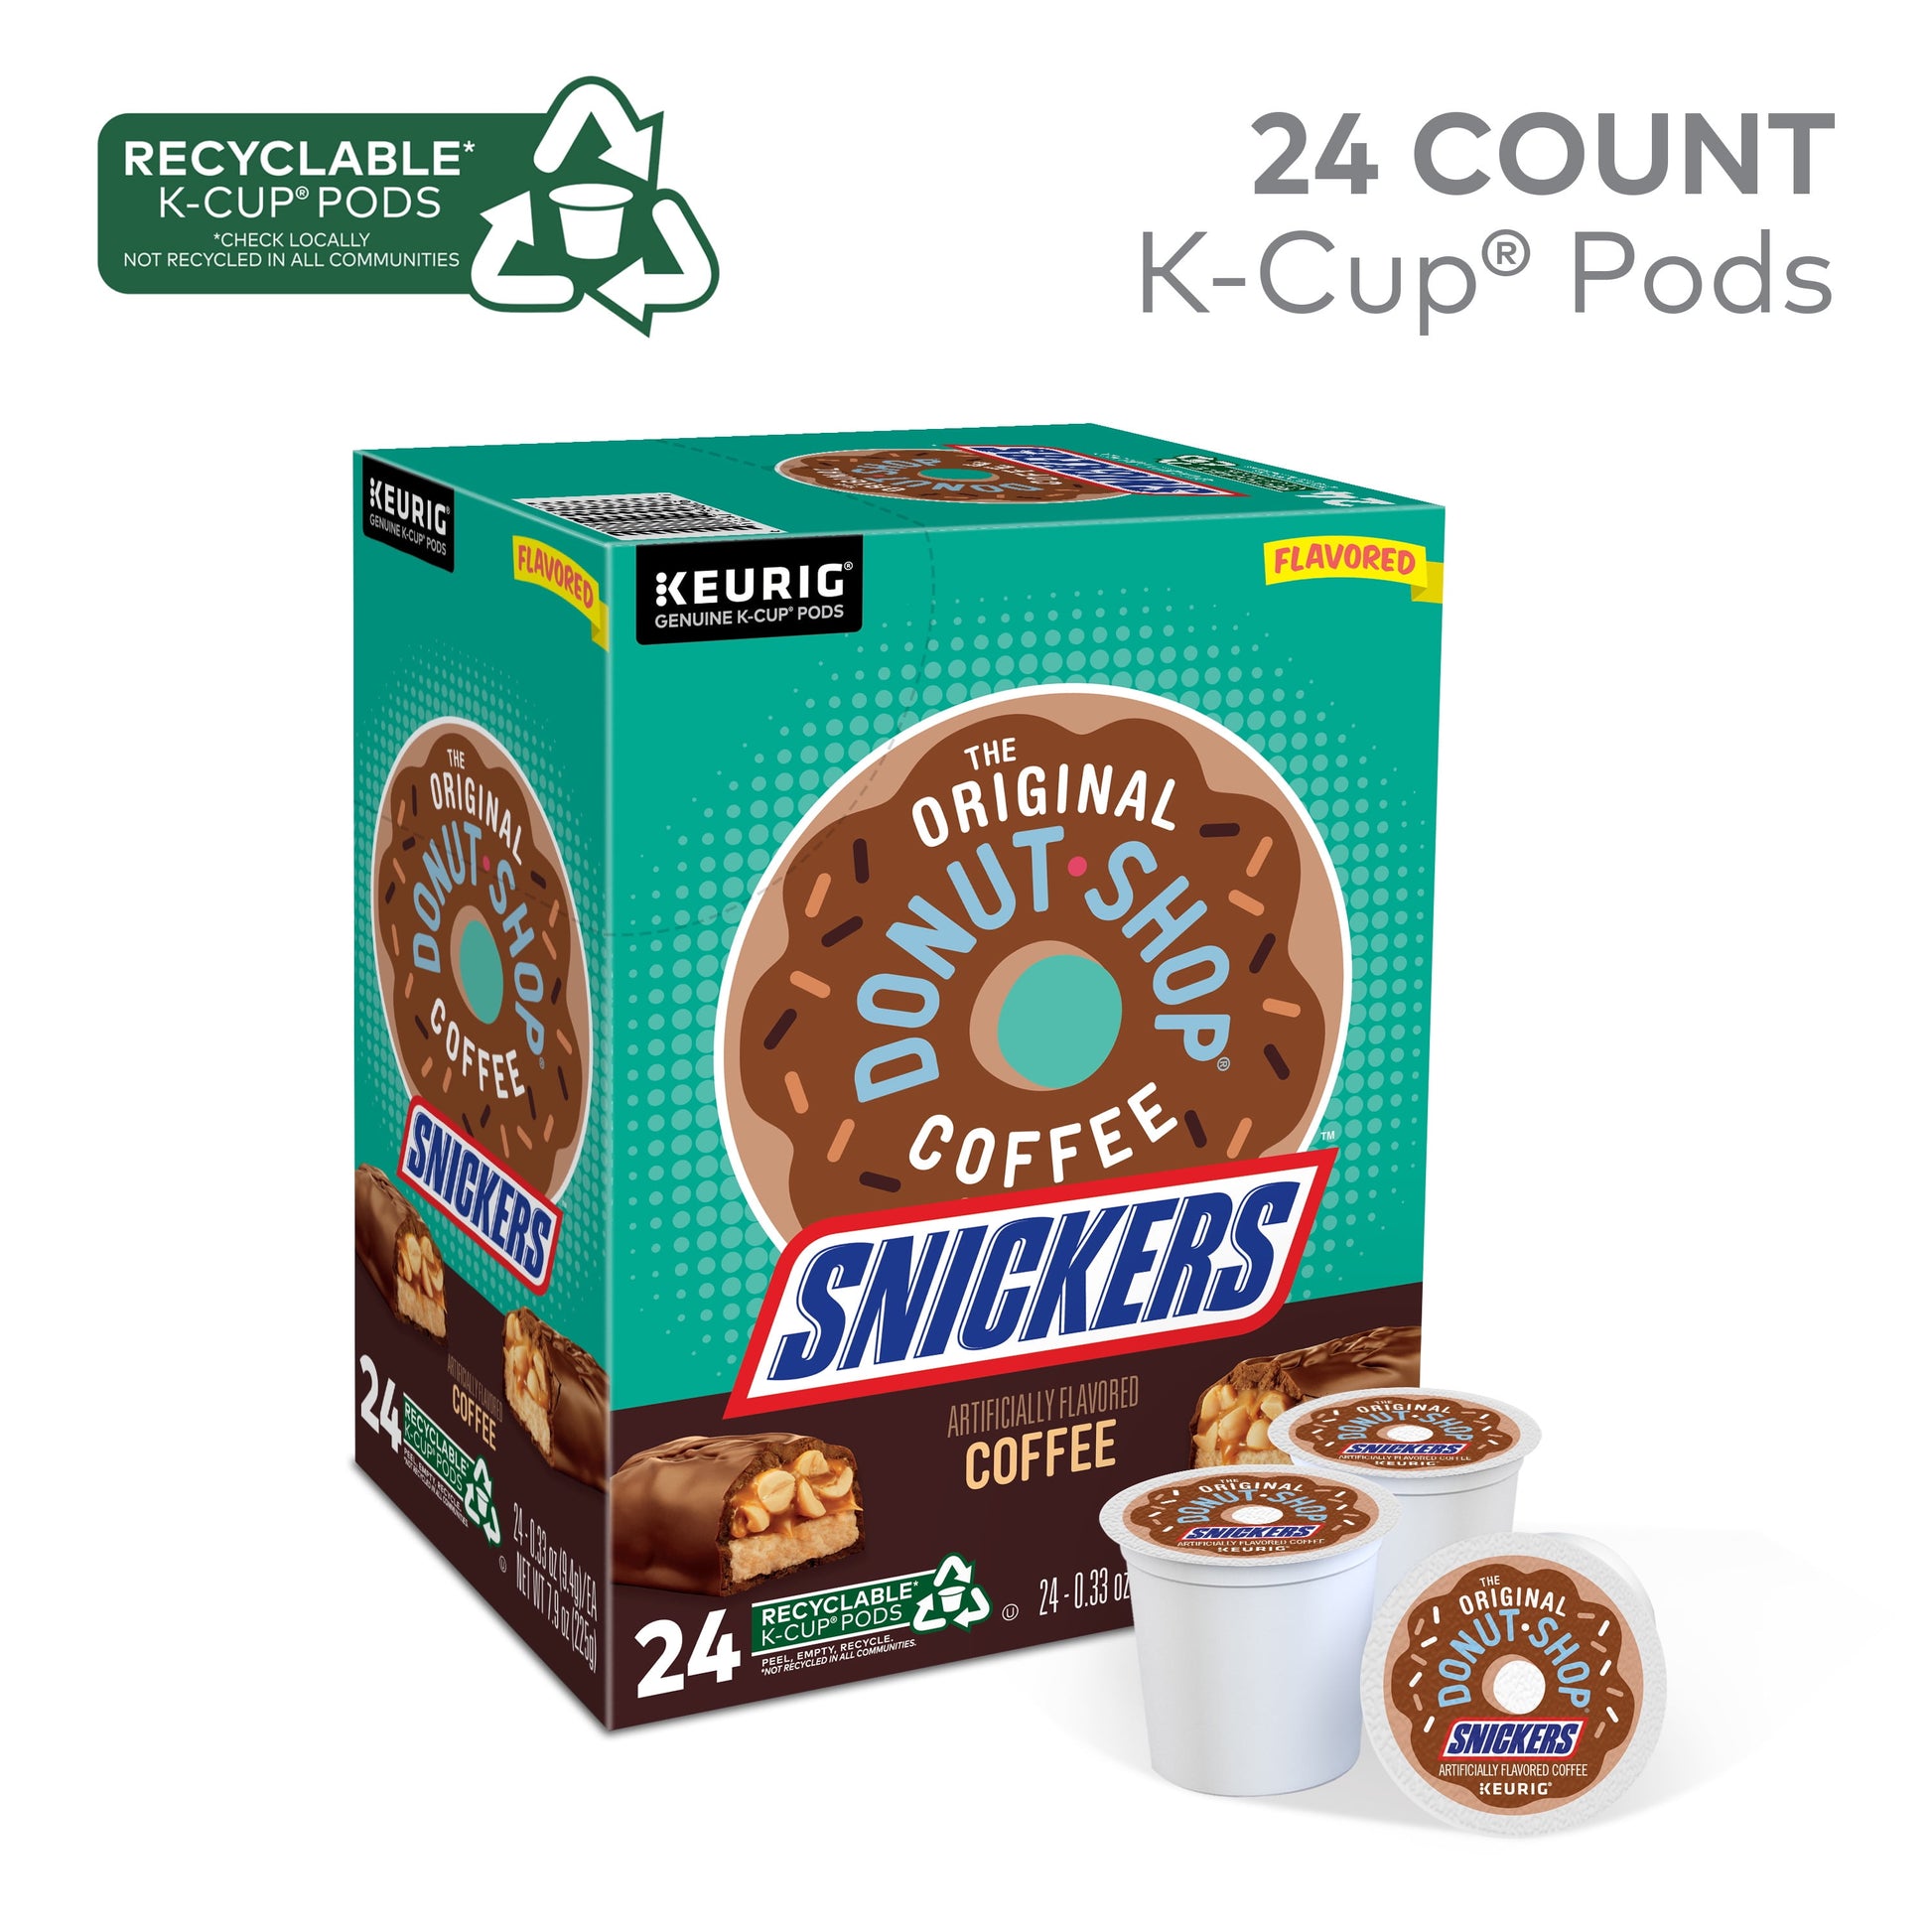 , Snickers Flavored K-Cup Coffee Pods, 24 Count